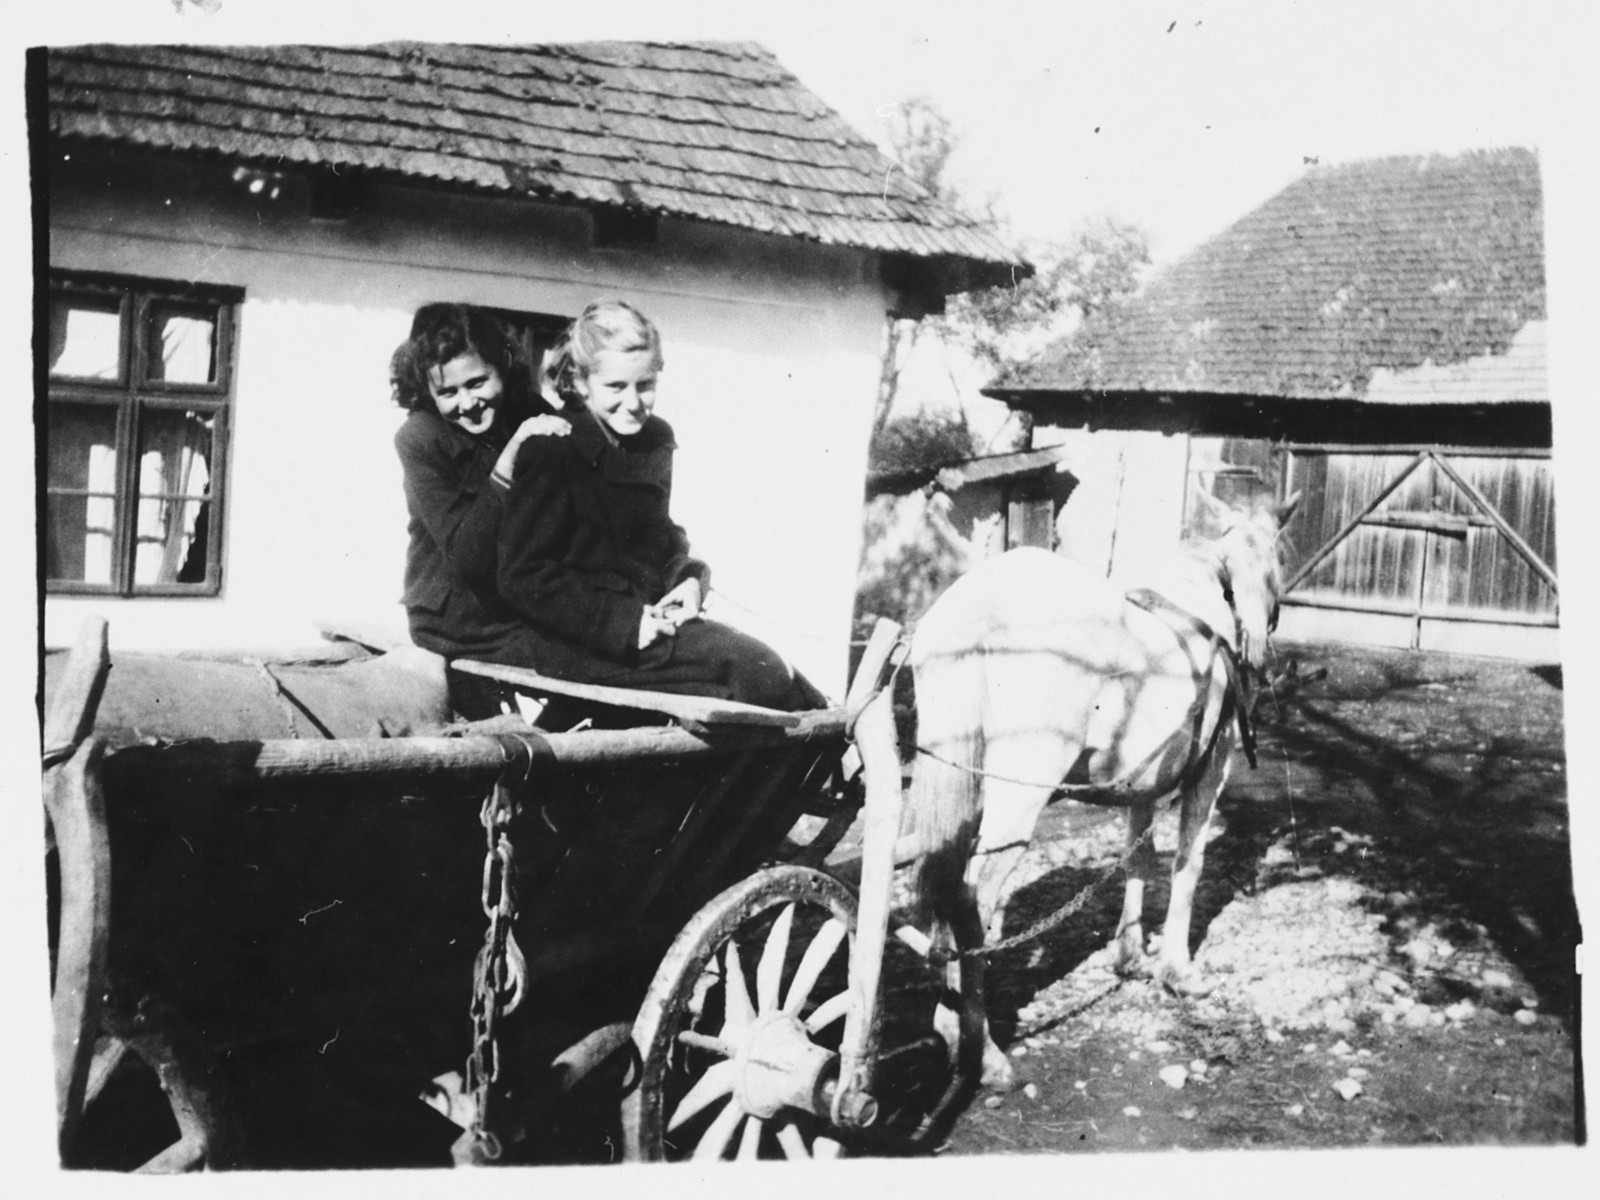 Two Jewish teenagers pose in a horse-drawn wagon in Bilki.

Pictured are Magdalena Mermelstein (left) with her friend, Alice Steinberger (right), outside Magdalena's grandparents' home.